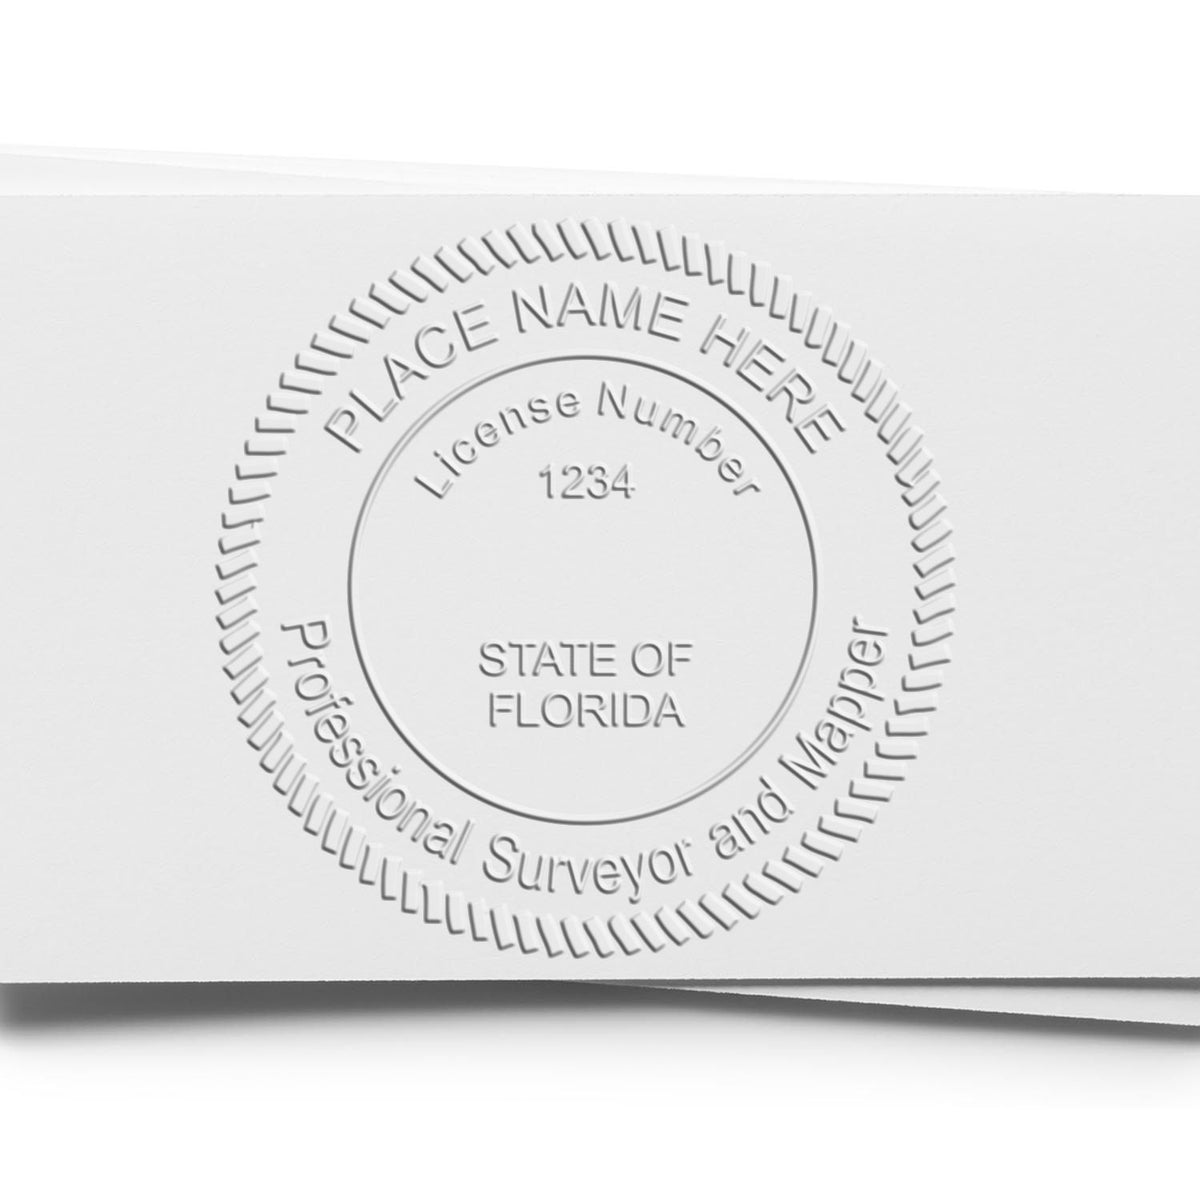 An alternative view of the Heavy Duty Cast Iron Florida Land Surveyor Seal Embosser stamped on a sheet of paper showing the image in use